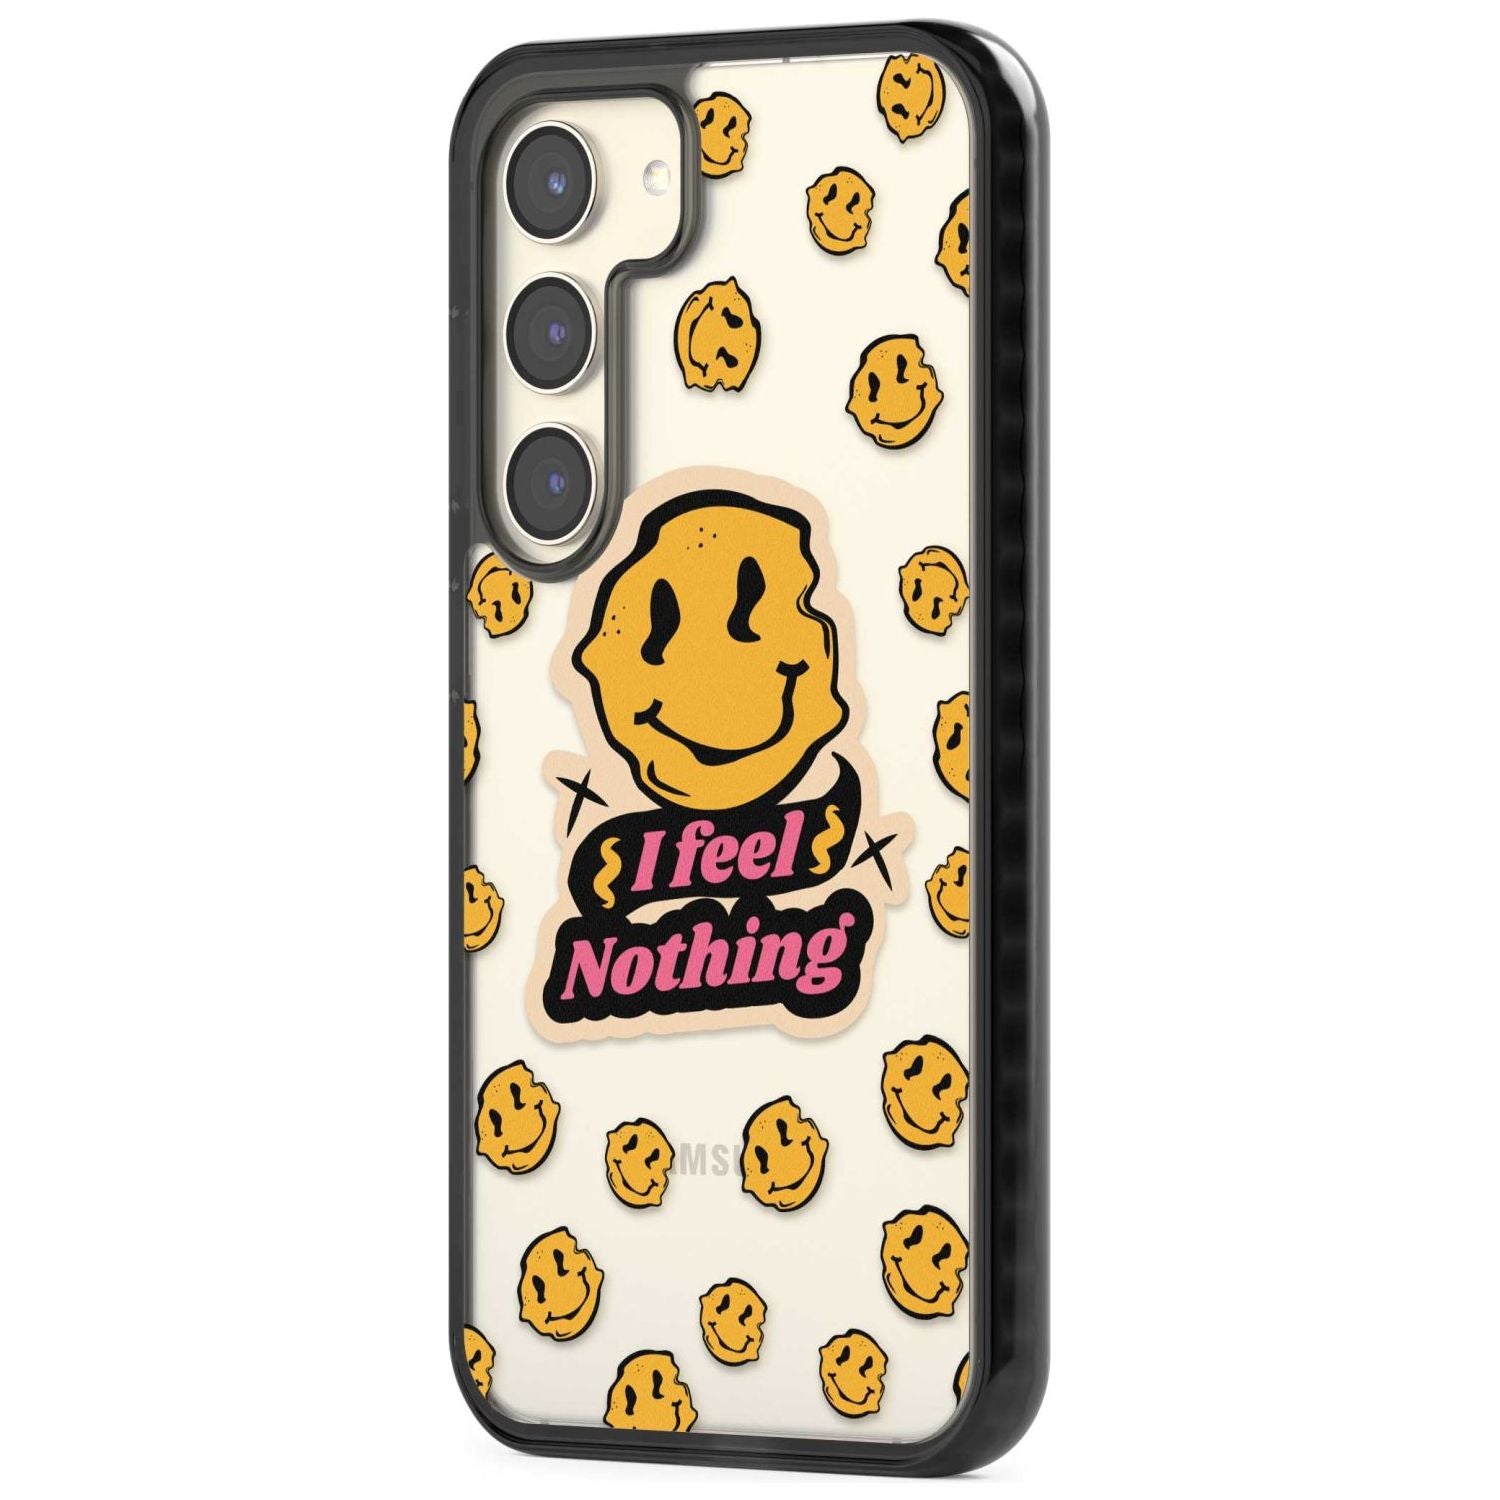 I feel nothing (Clear) Phone Case iPhone 15 Pro Max / Black Impact Case,iPhone 15 Plus / Black Impact Case,iPhone 15 Pro / Black Impact Case,iPhone 15 / Black Impact Case,iPhone 15 Pro Max / Impact Case,iPhone 15 Plus / Impact Case,iPhone 15 Pro / Impact Case,iPhone 15 / Impact Case,iPhone 15 Pro Max / Magsafe Black Impact Case,iPhone 15 Plus / Magsafe Black Impact Case,iPhone 15 Pro / Magsafe Black Impact Case,iPhone 15 / Magsafe Black Impact Case,iPhone 14 Pro Max / Black Impact Case,iPhone 14 Plus / Blac